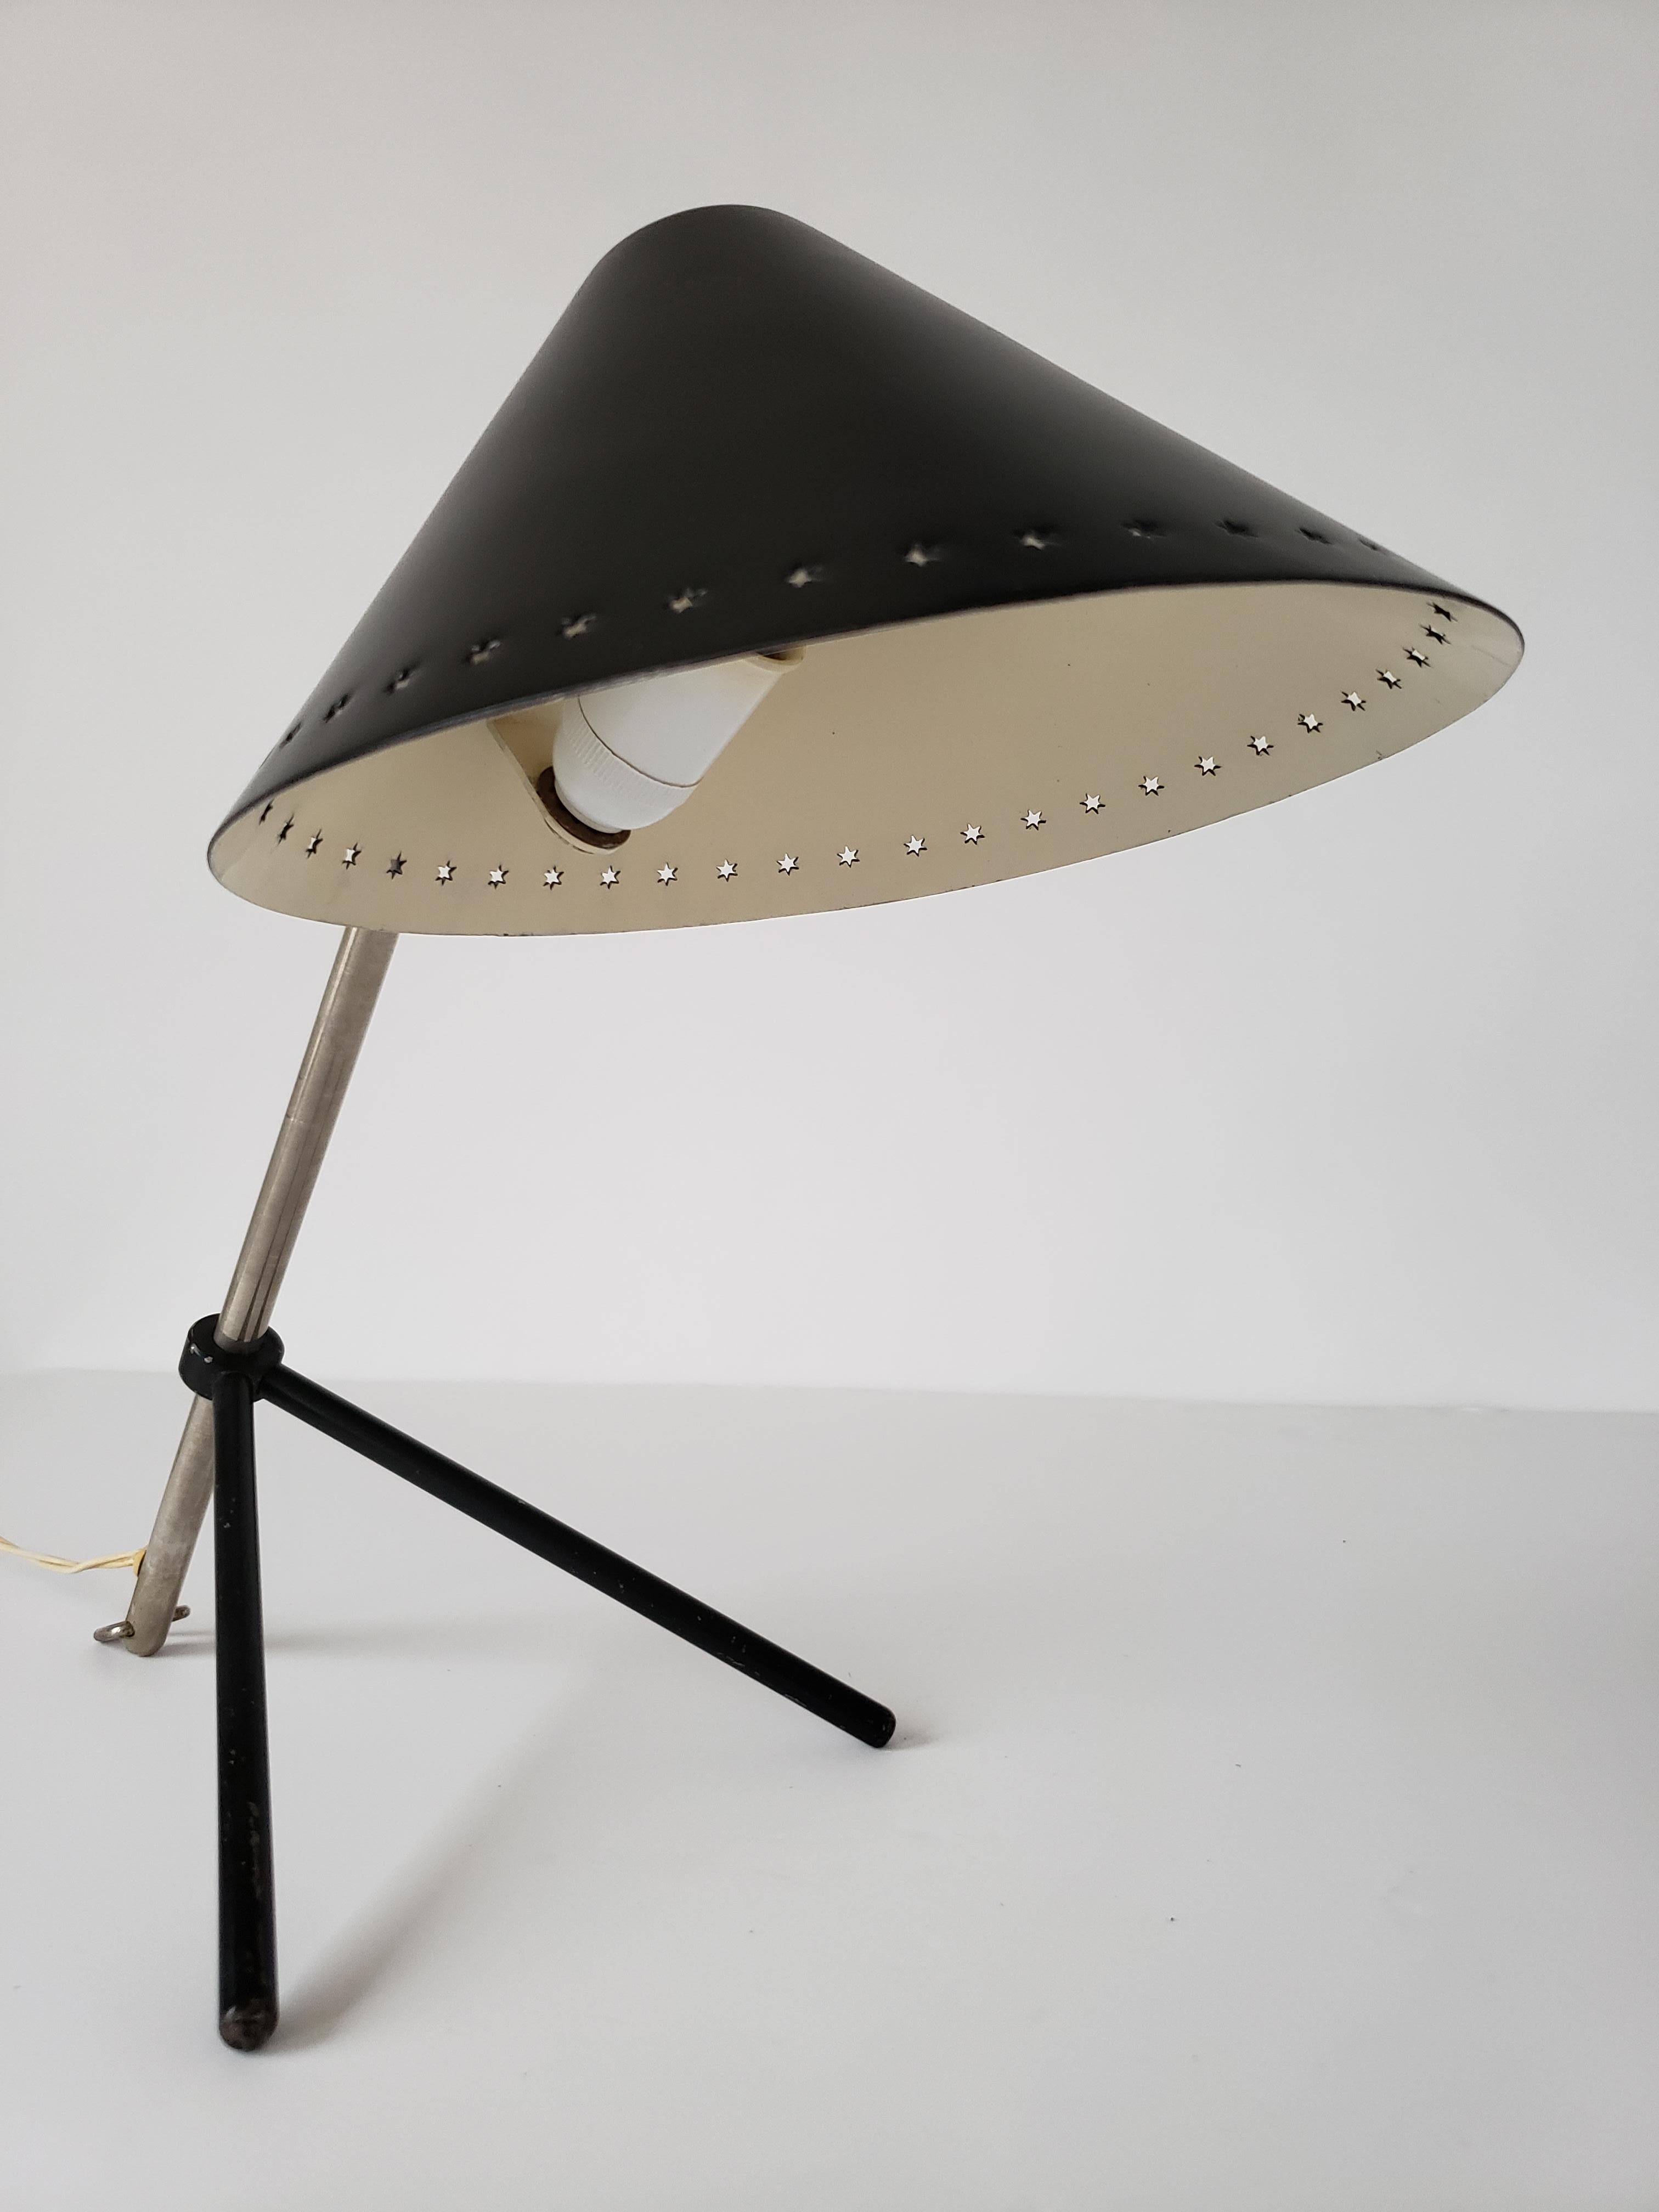 1950s  'Pinocchio' Table or Wall Lamp by H. Busquet for Hala Zeist, Netherlands 1